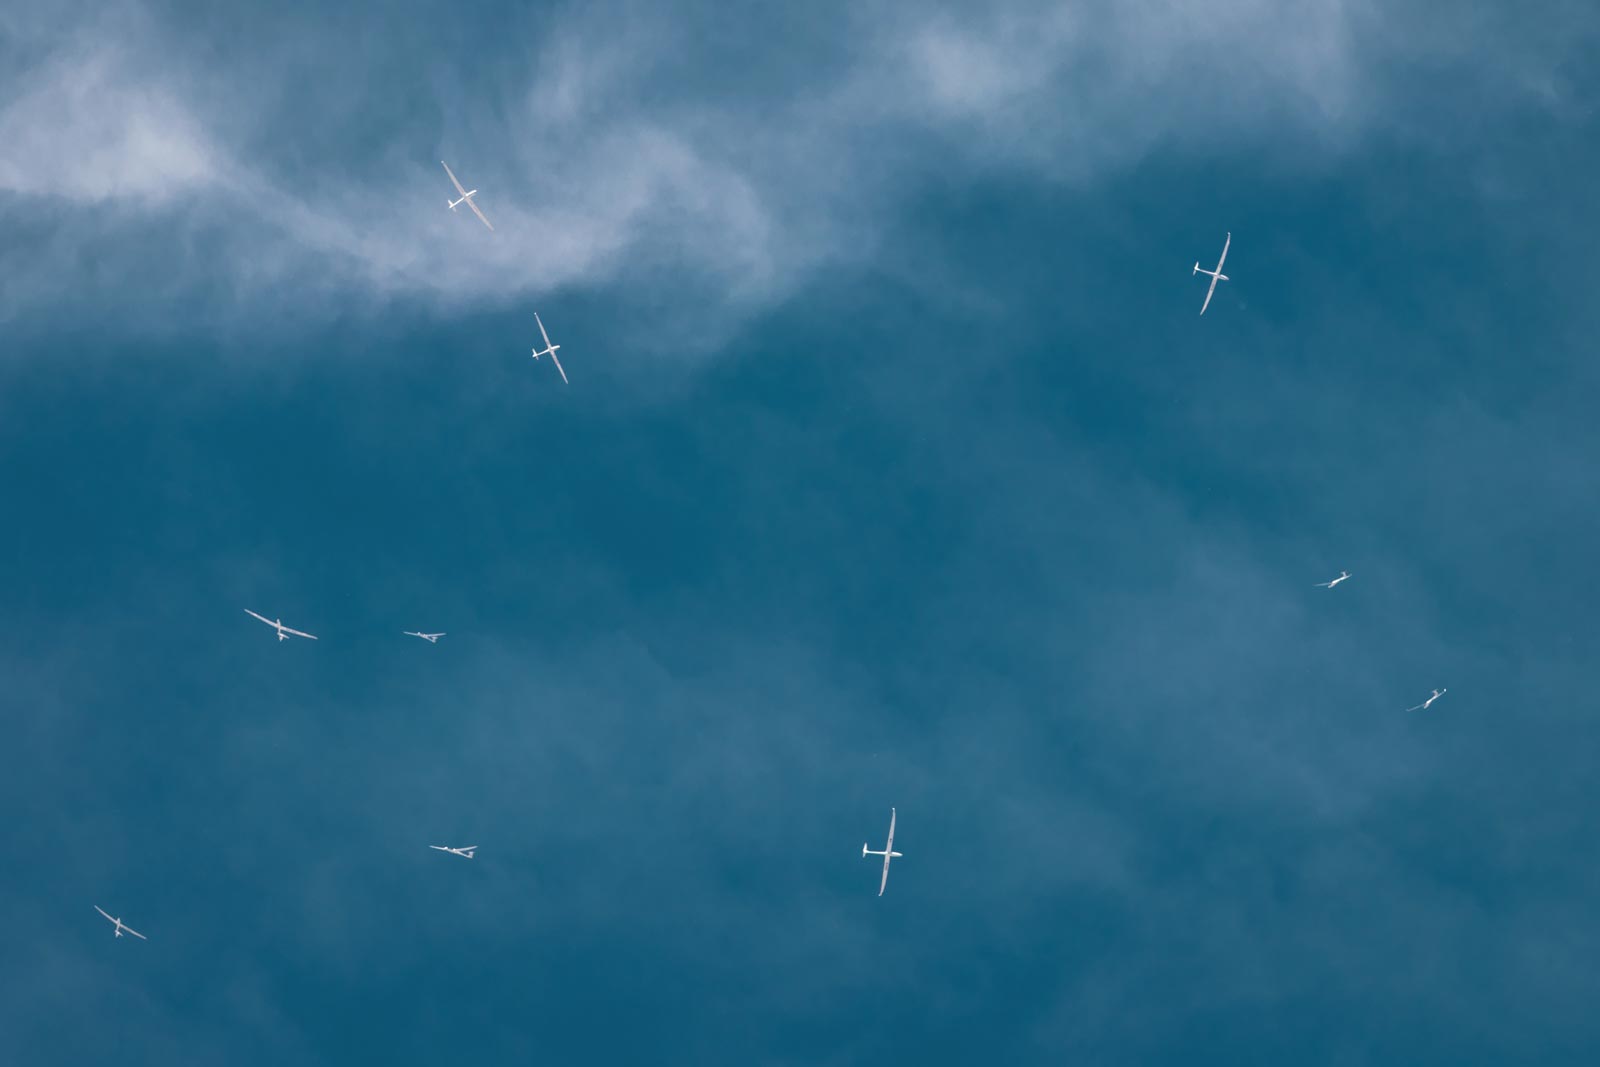 white gliders in flight against a blue sky